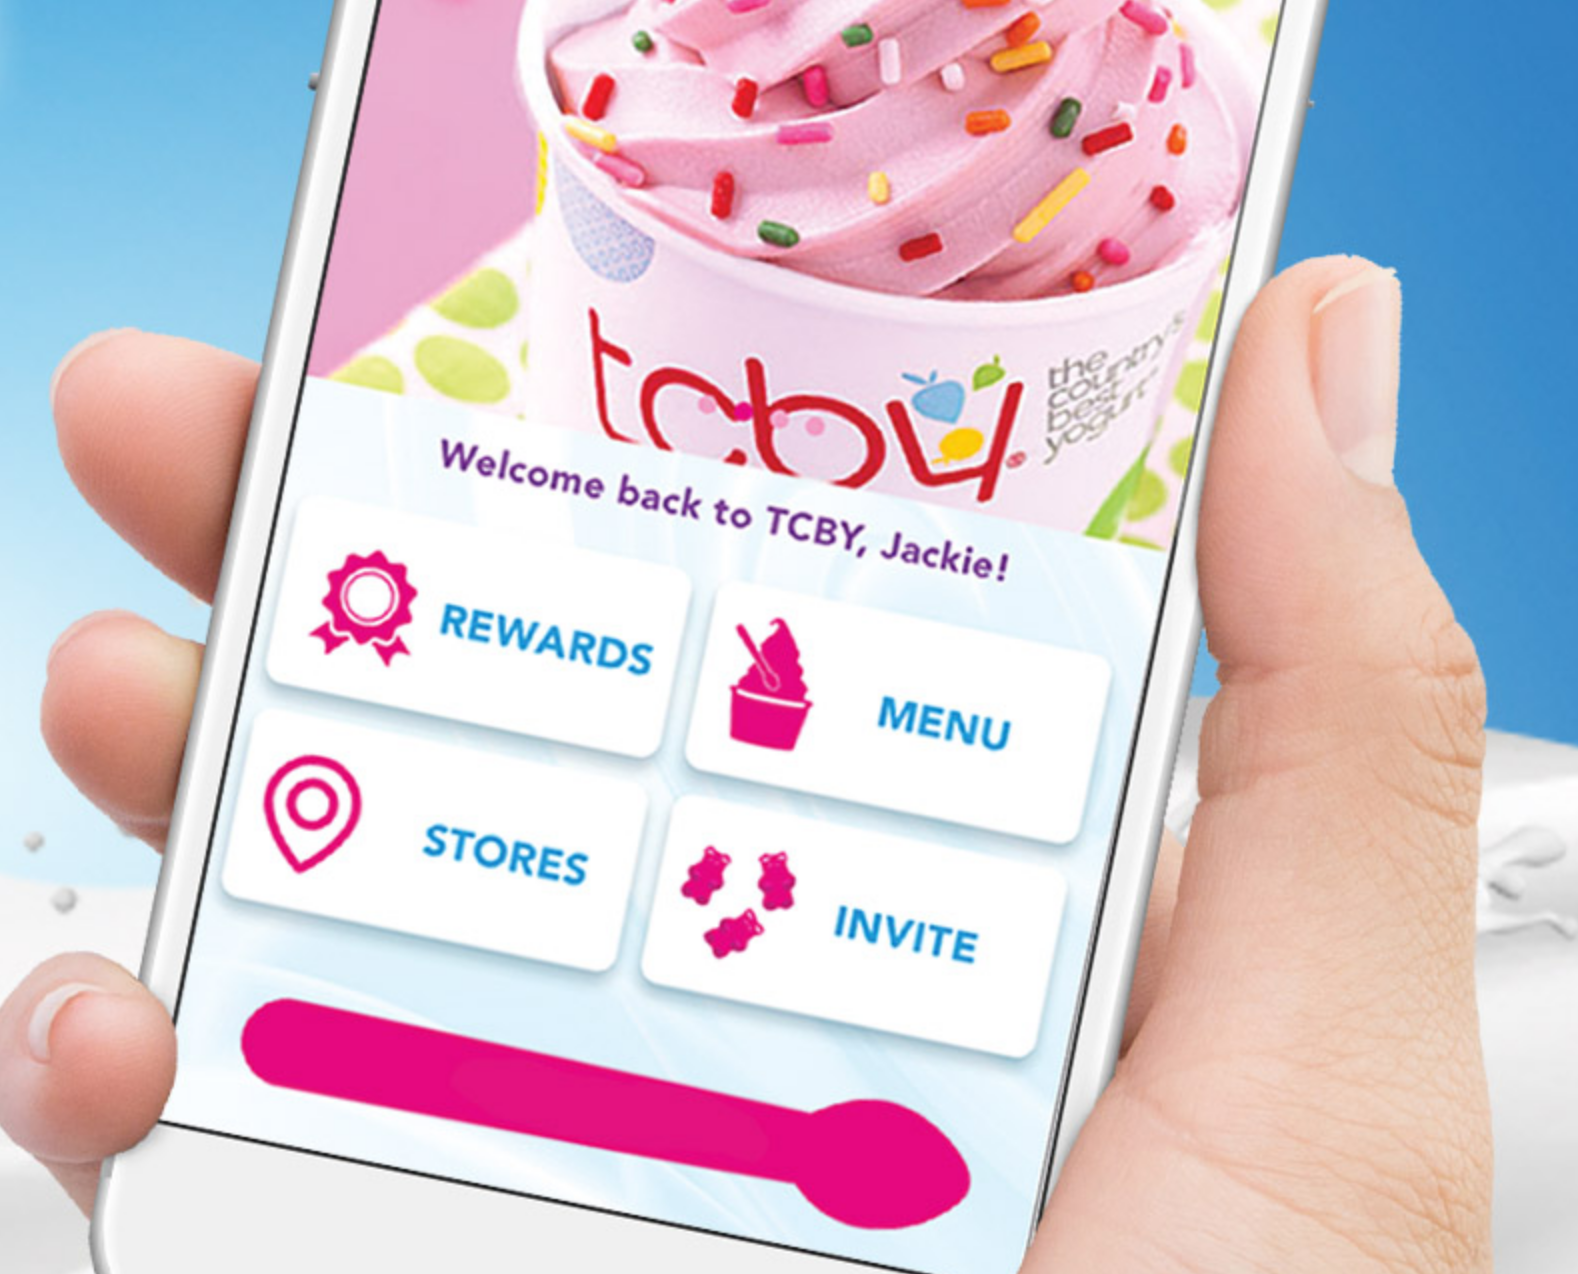 Hand holding smart phone open to the TCBY app